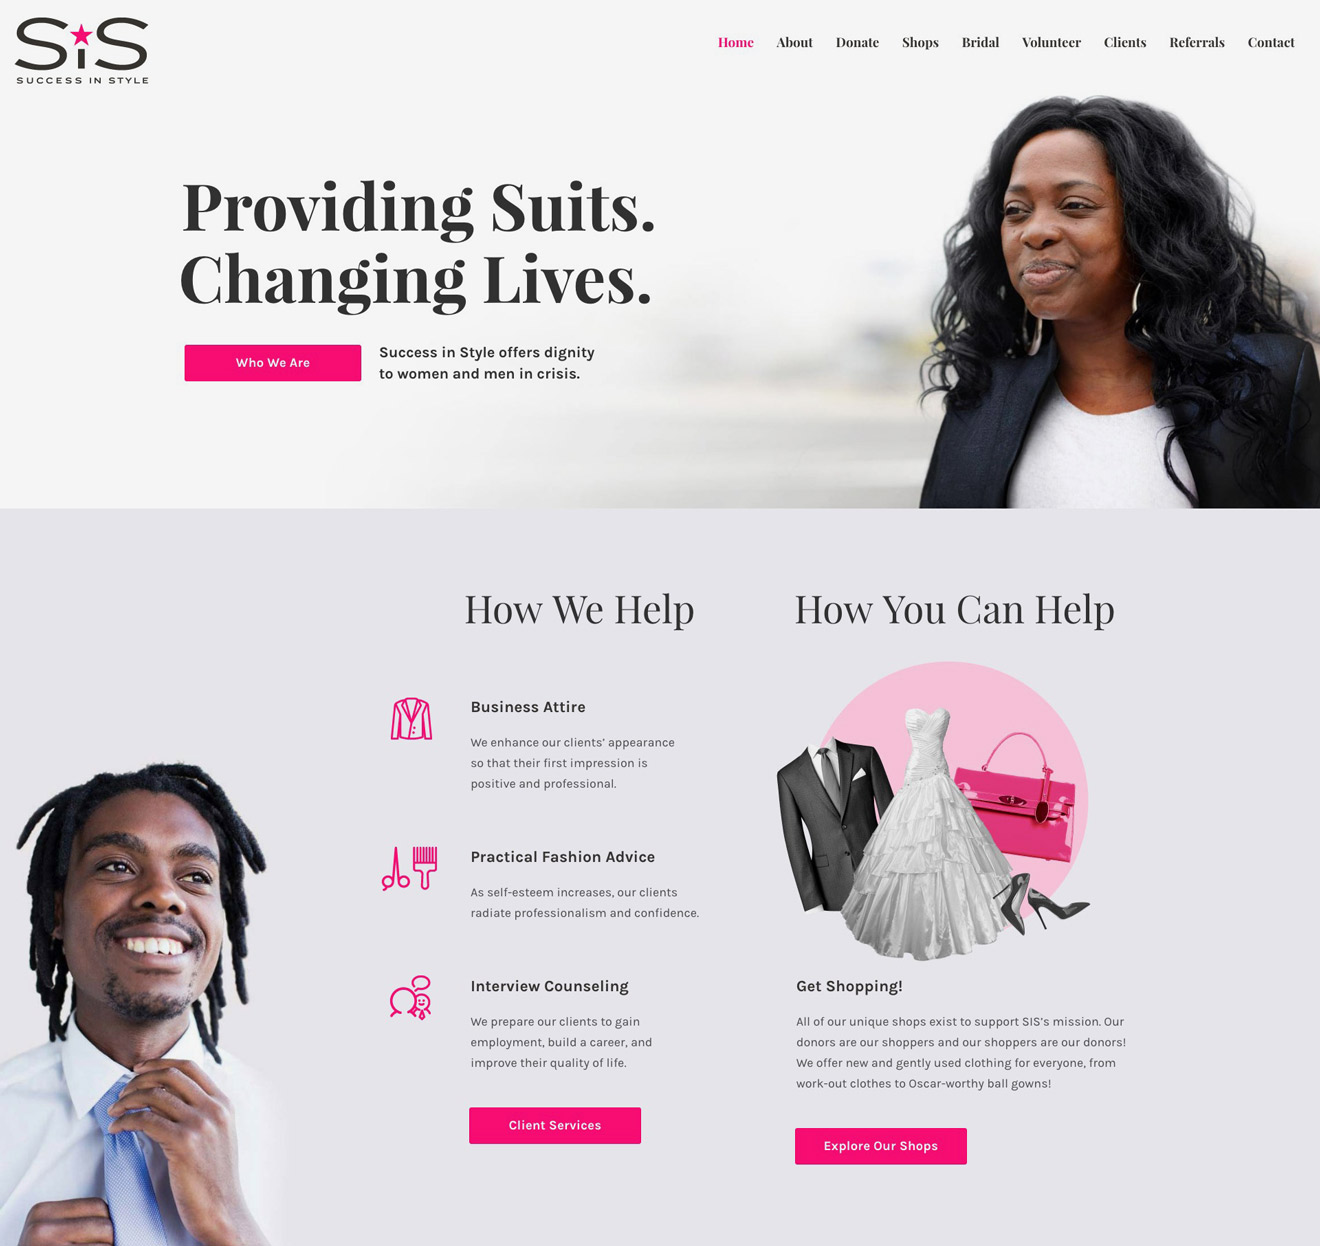 Success in Style website landing page design